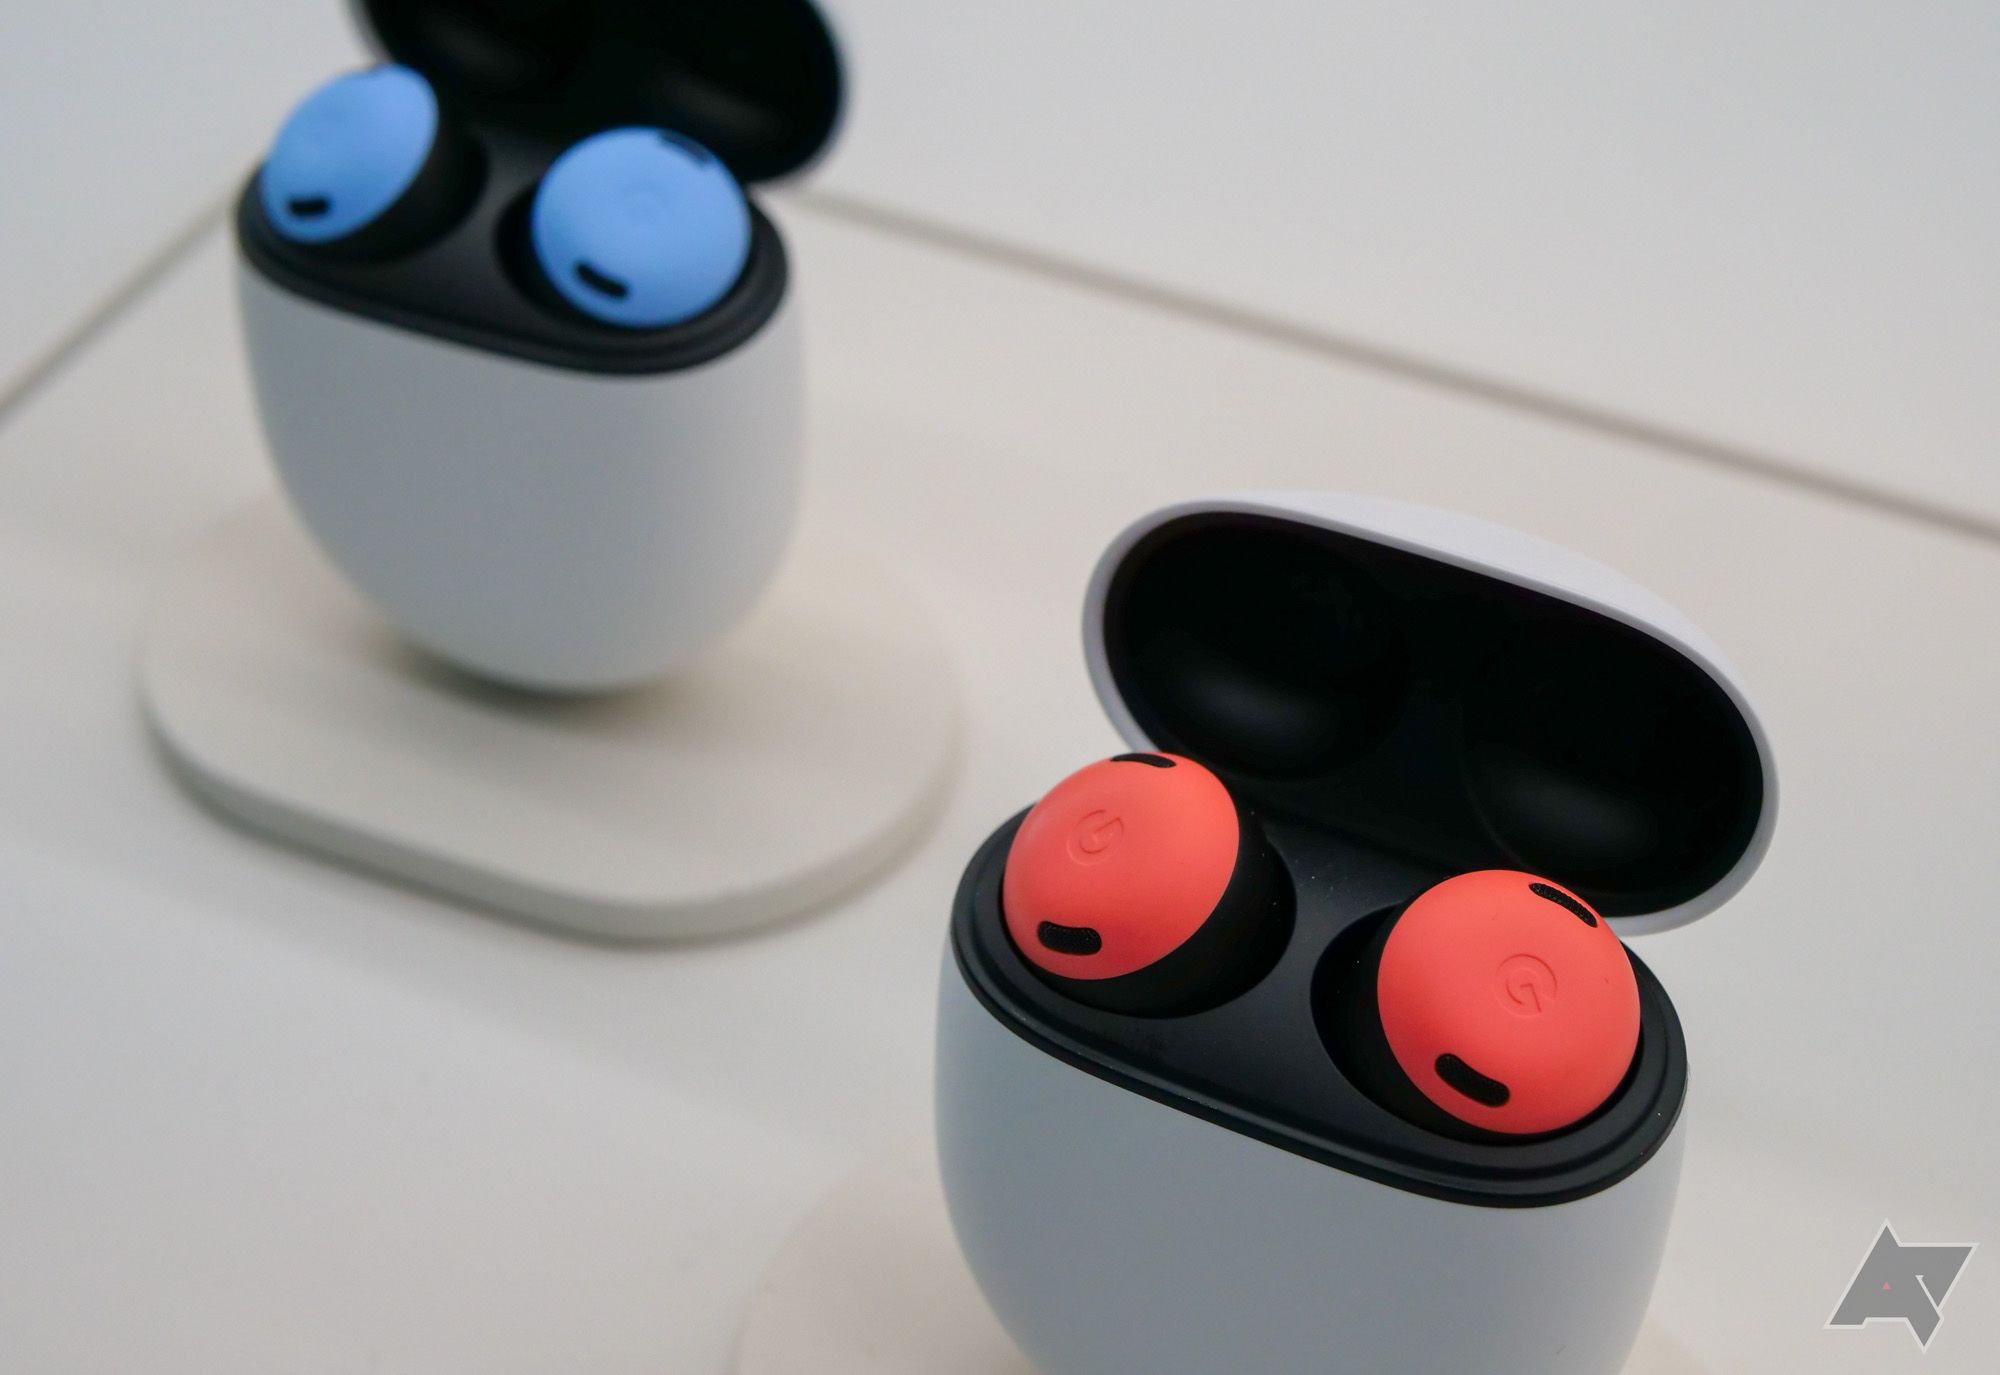 New Pixel Buds Pro colors could be coming to Pixel fall launch 